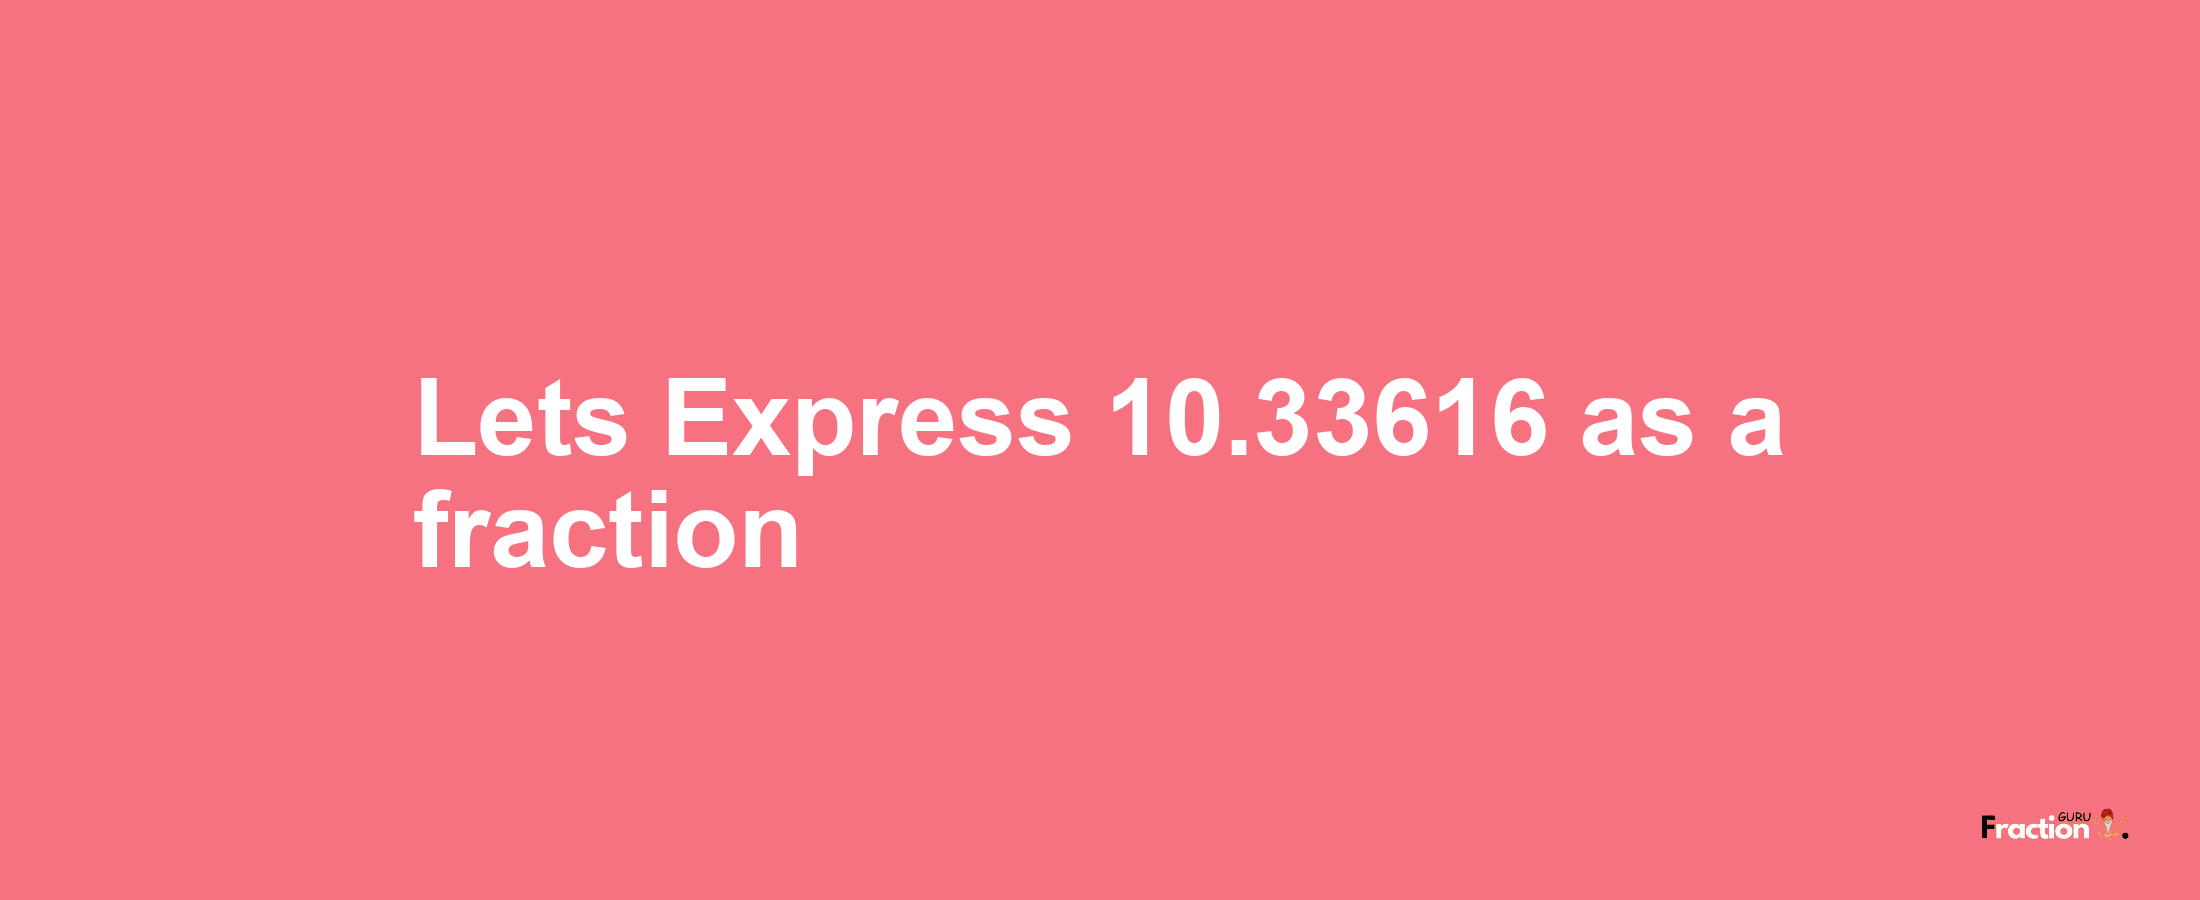 Lets Express 10.33616 as afraction